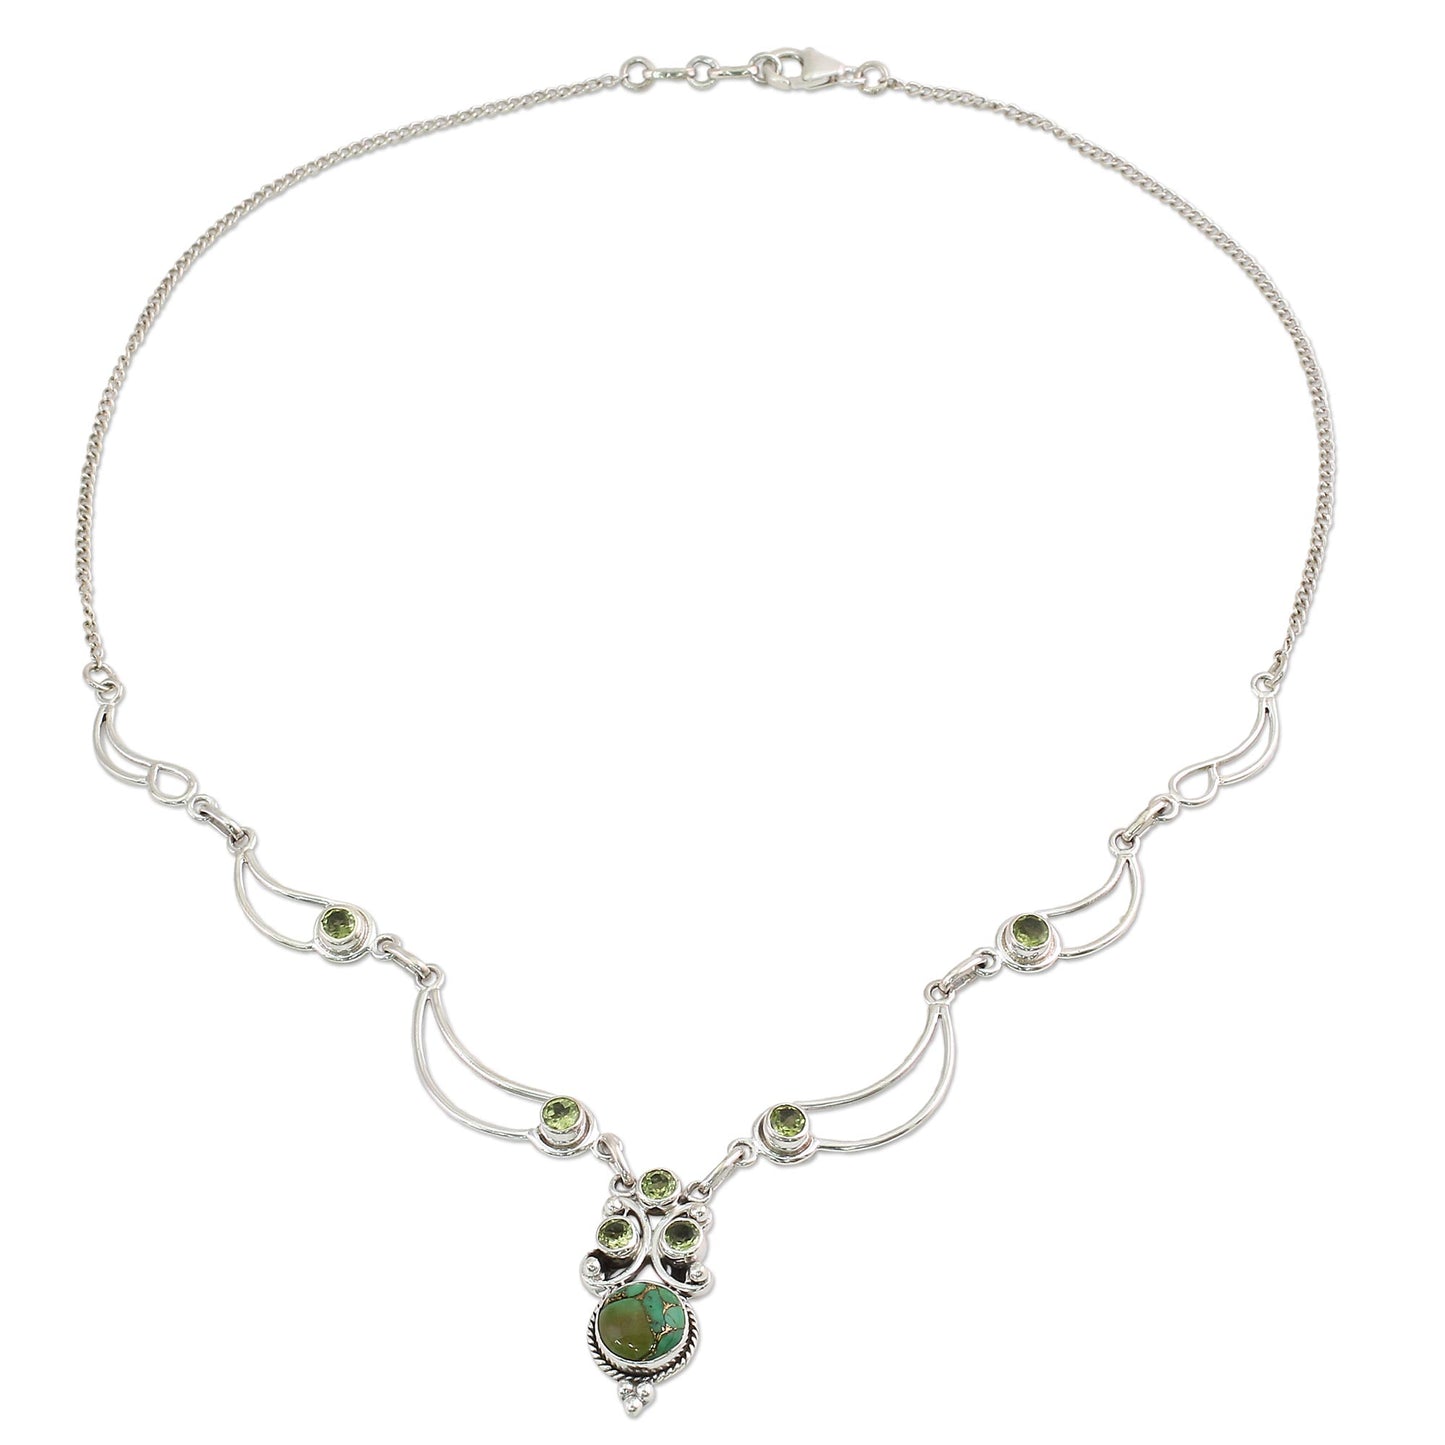 Radiant Princess in Green Necklace